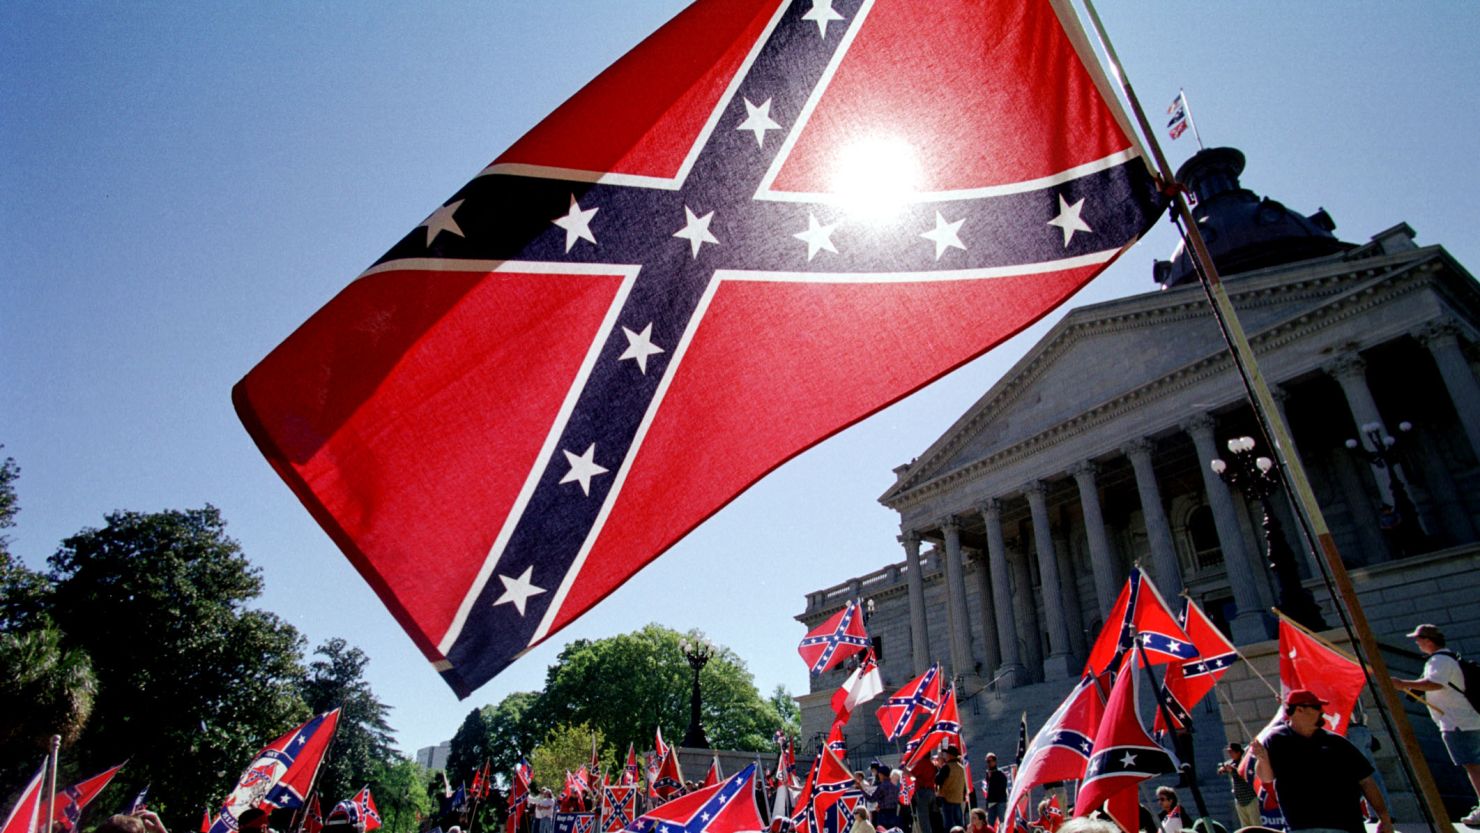 Dean Obeidallah says the Confederate battle flag was carried by enemy troops as they killed U.S. soldiers.